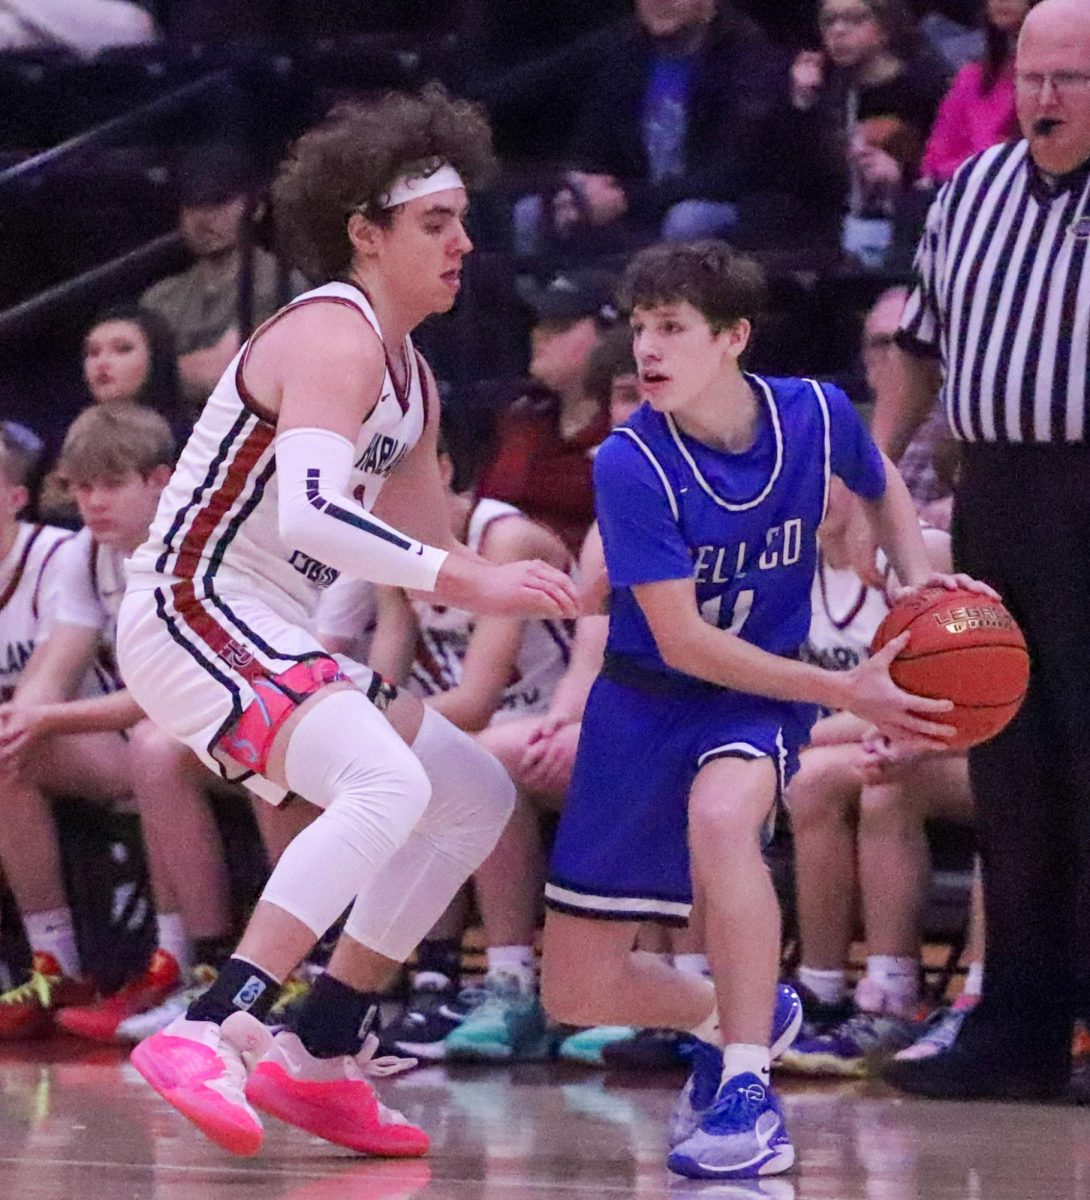 Bell County freshman guard Jaxon Thomas looked for a teammate as Harlan Countys Maddox Huff defended in Tuesdays district clash.